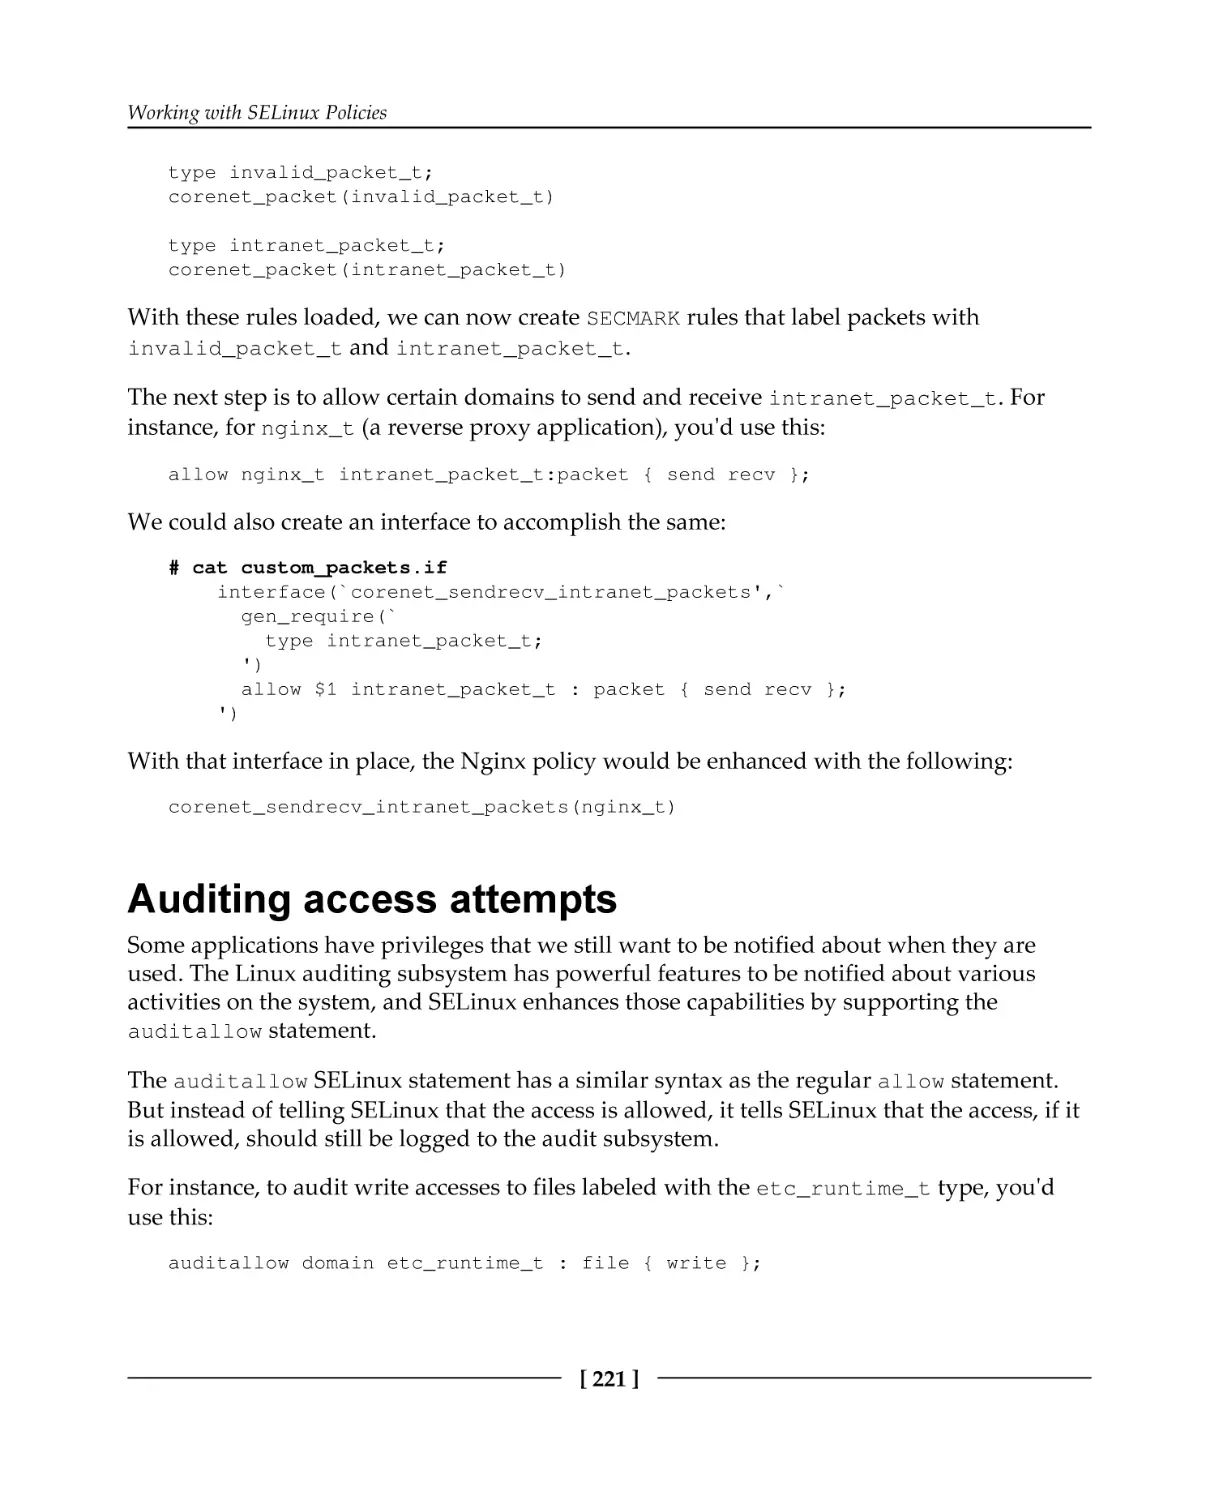 Auditing access attempts